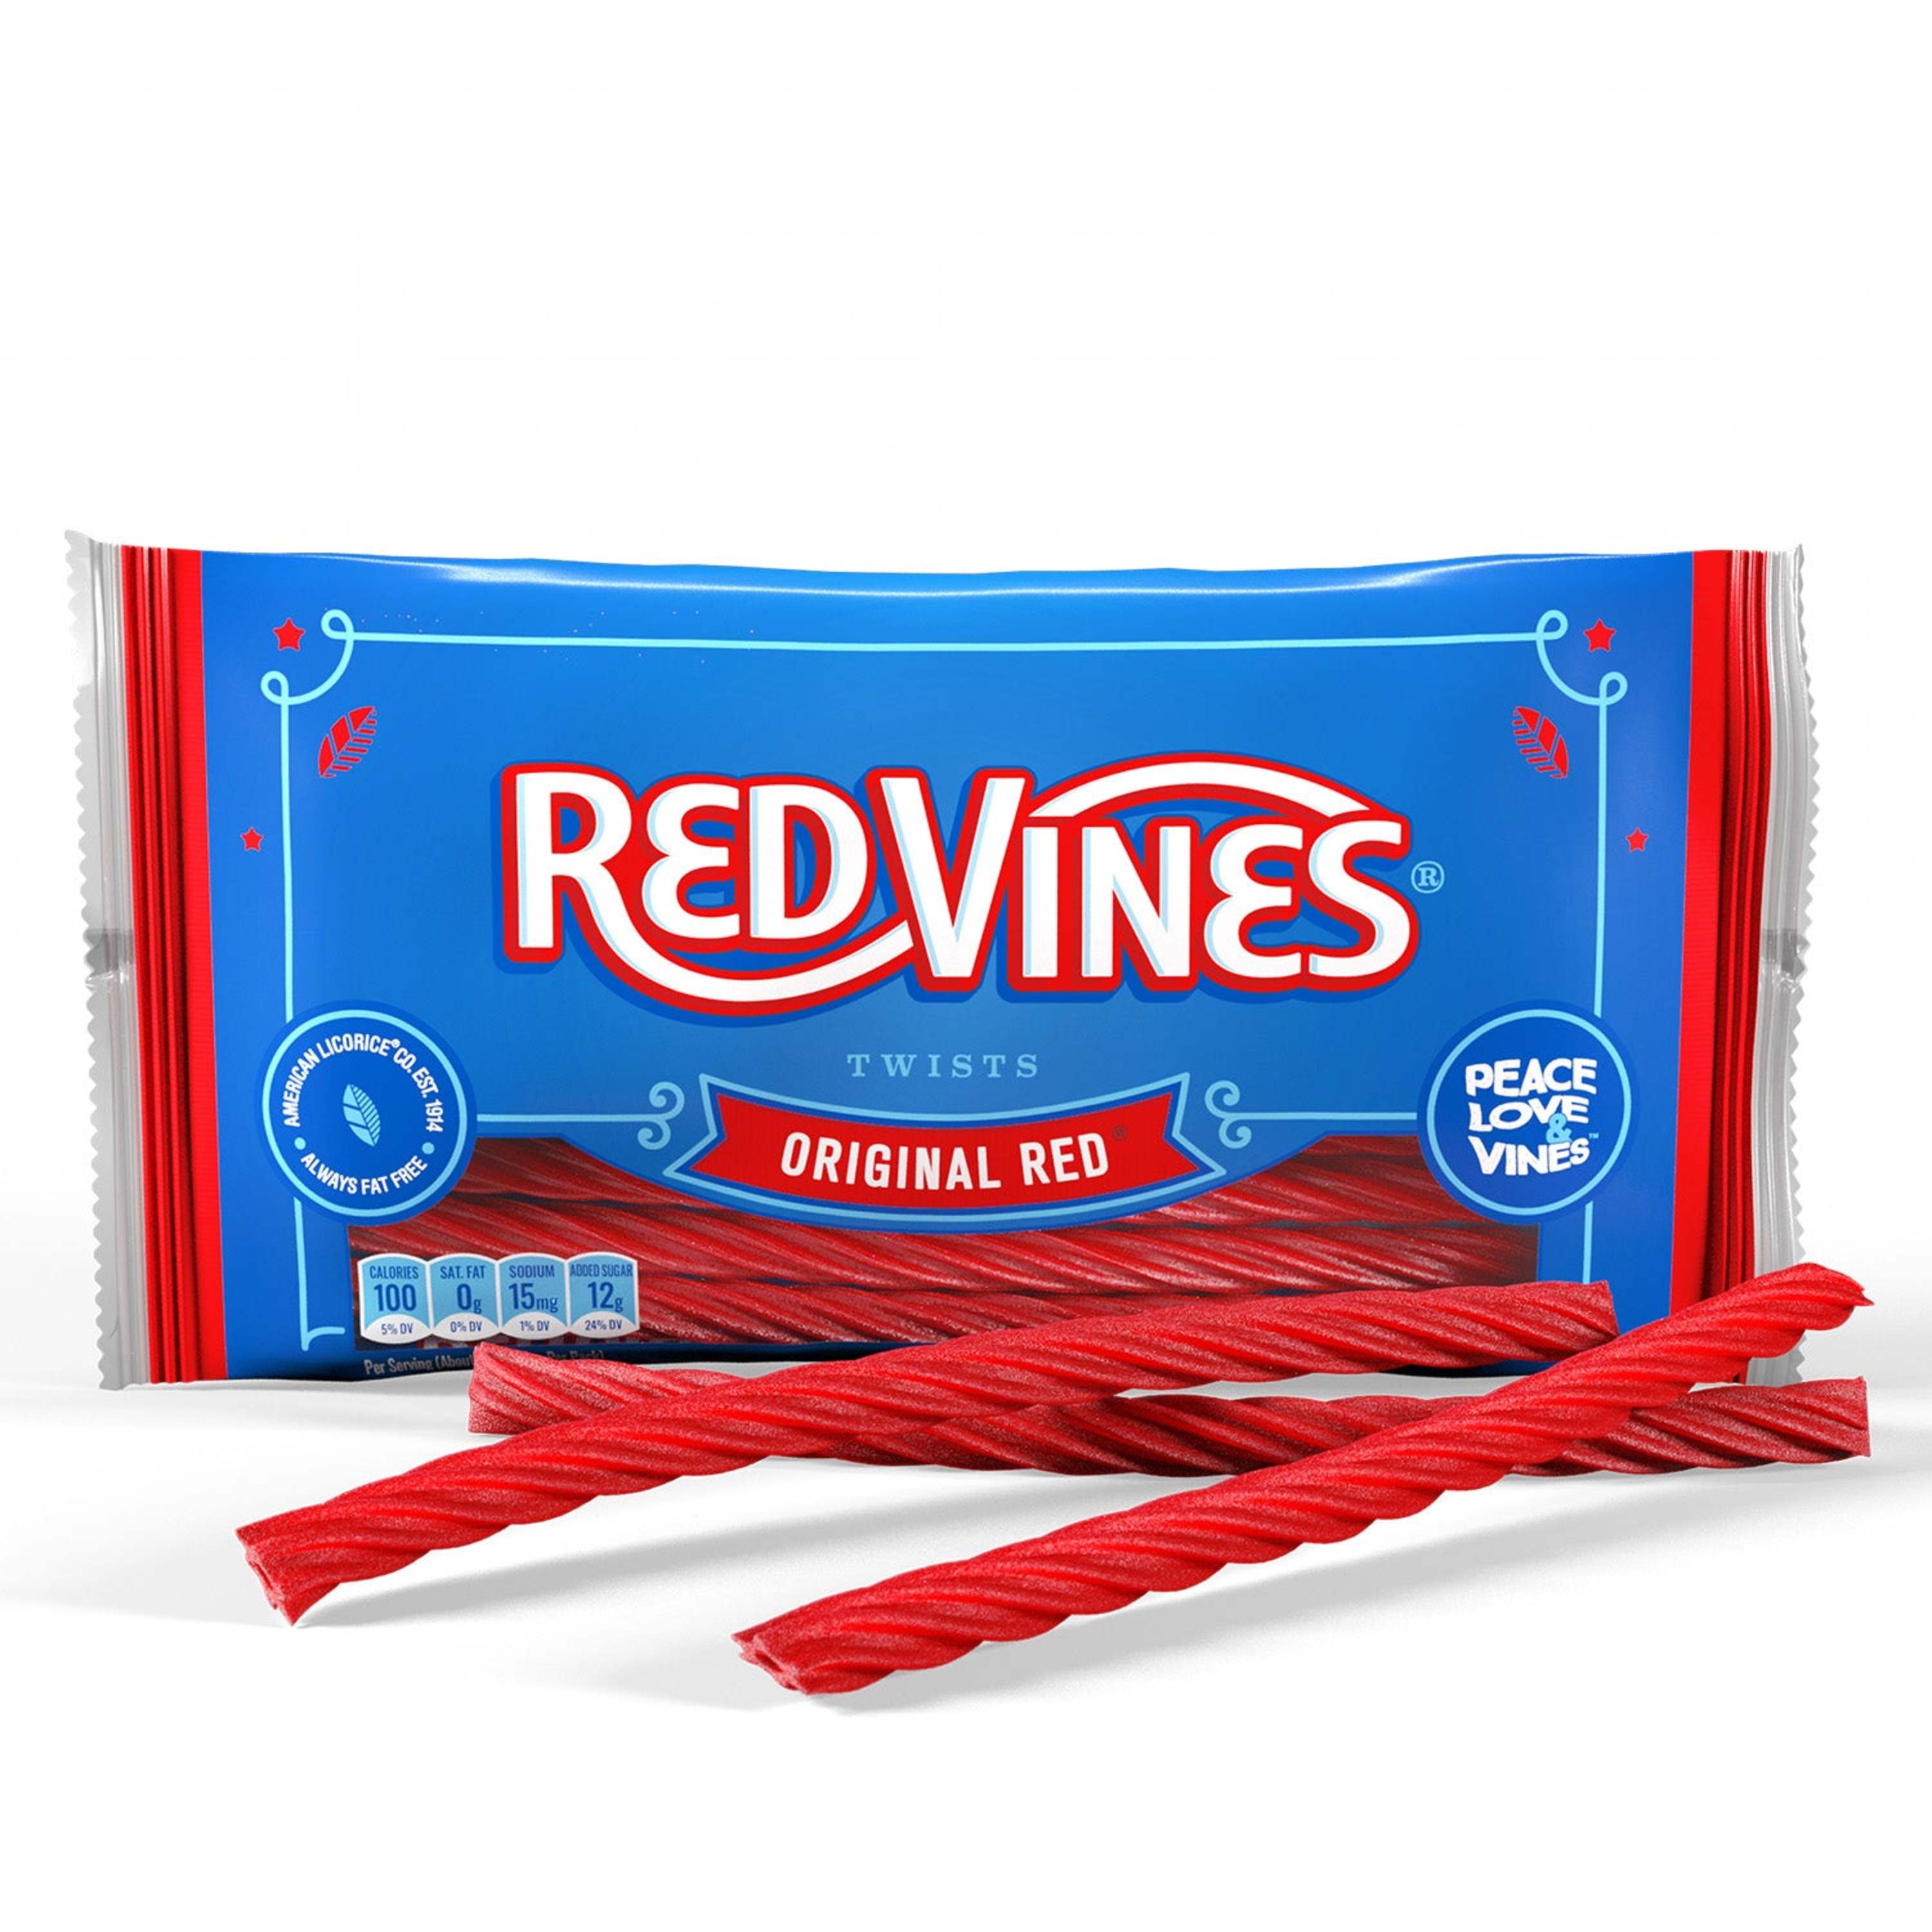 RED VINES Original Red licorice twists with candy in front